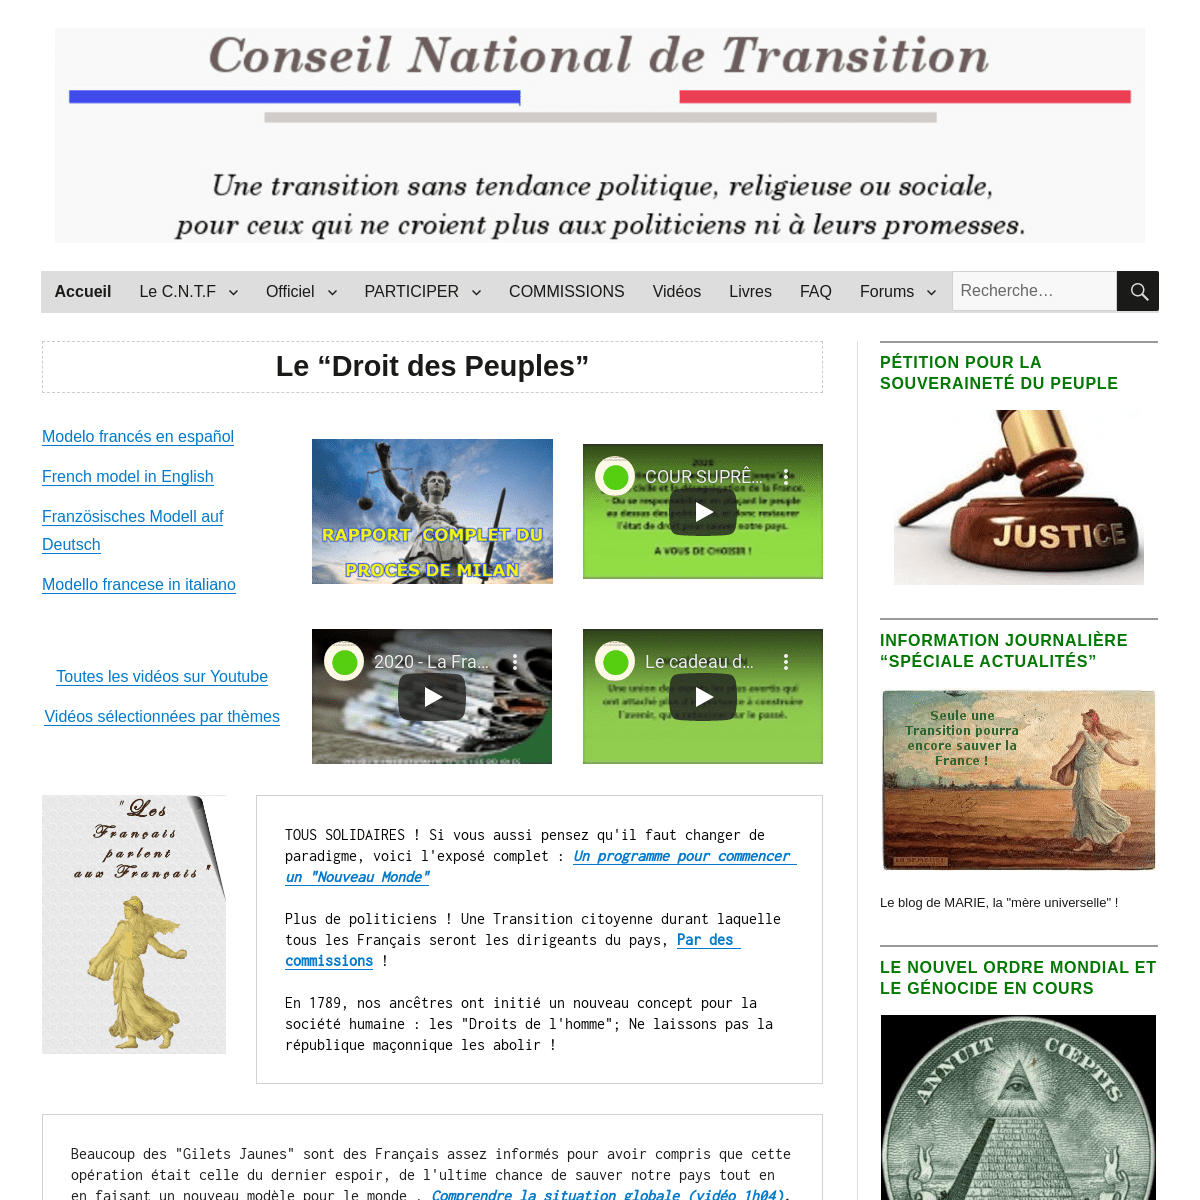 A complete backup of conseilnational.fr